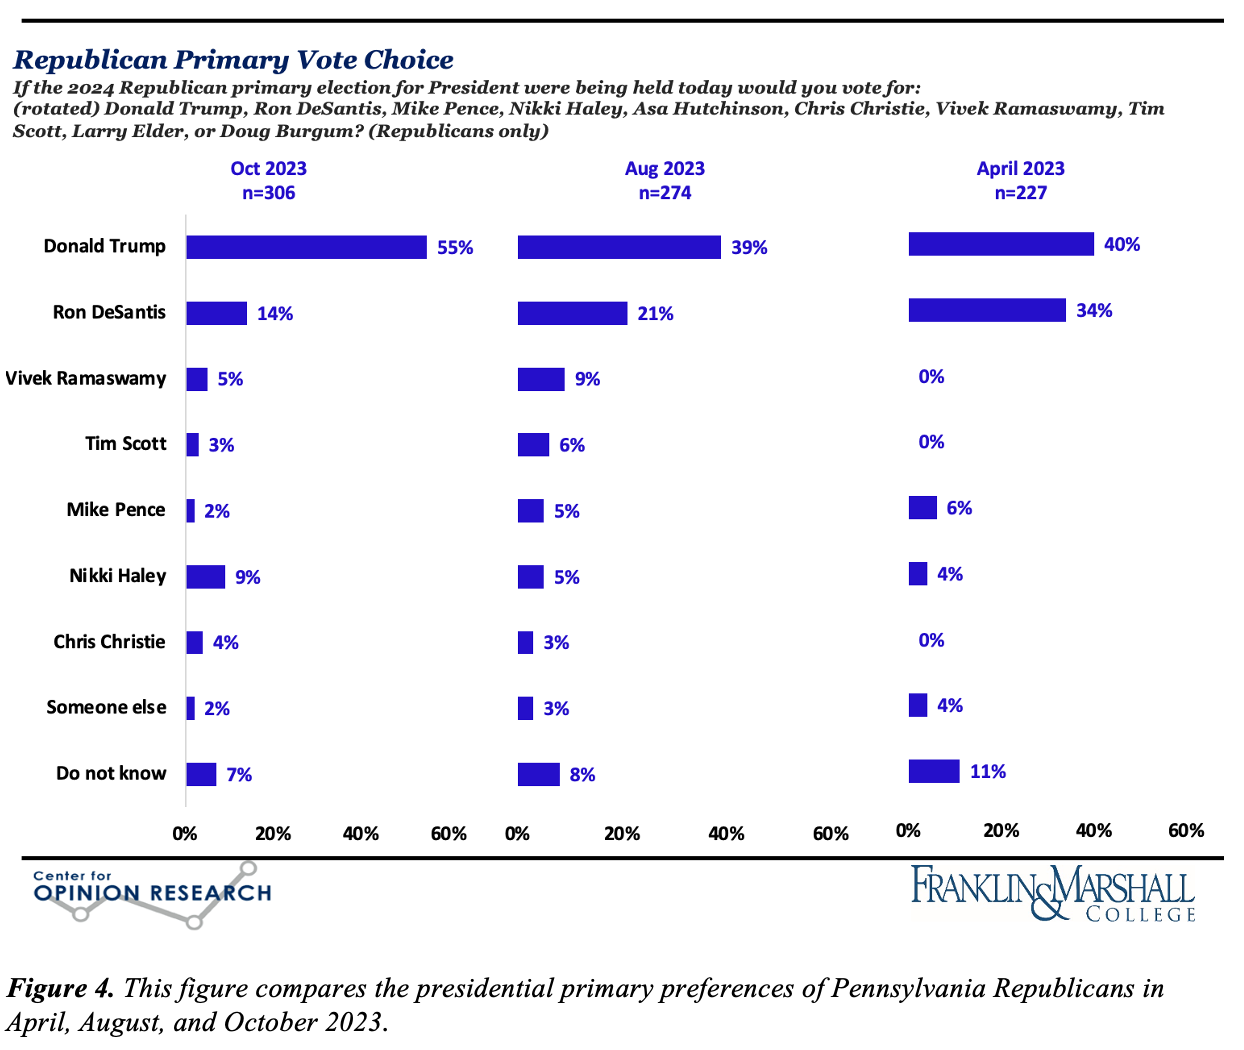 Figure 4. Bar chart comparing the presidential primary preferences of Pennsylvania Republicans in April, August, and October 2023. Candidates listed are Trump, DeSantis, Ramaswamy, Scott, Pence, Haley, and Christy. Other categories are "someone else" and "do not know."